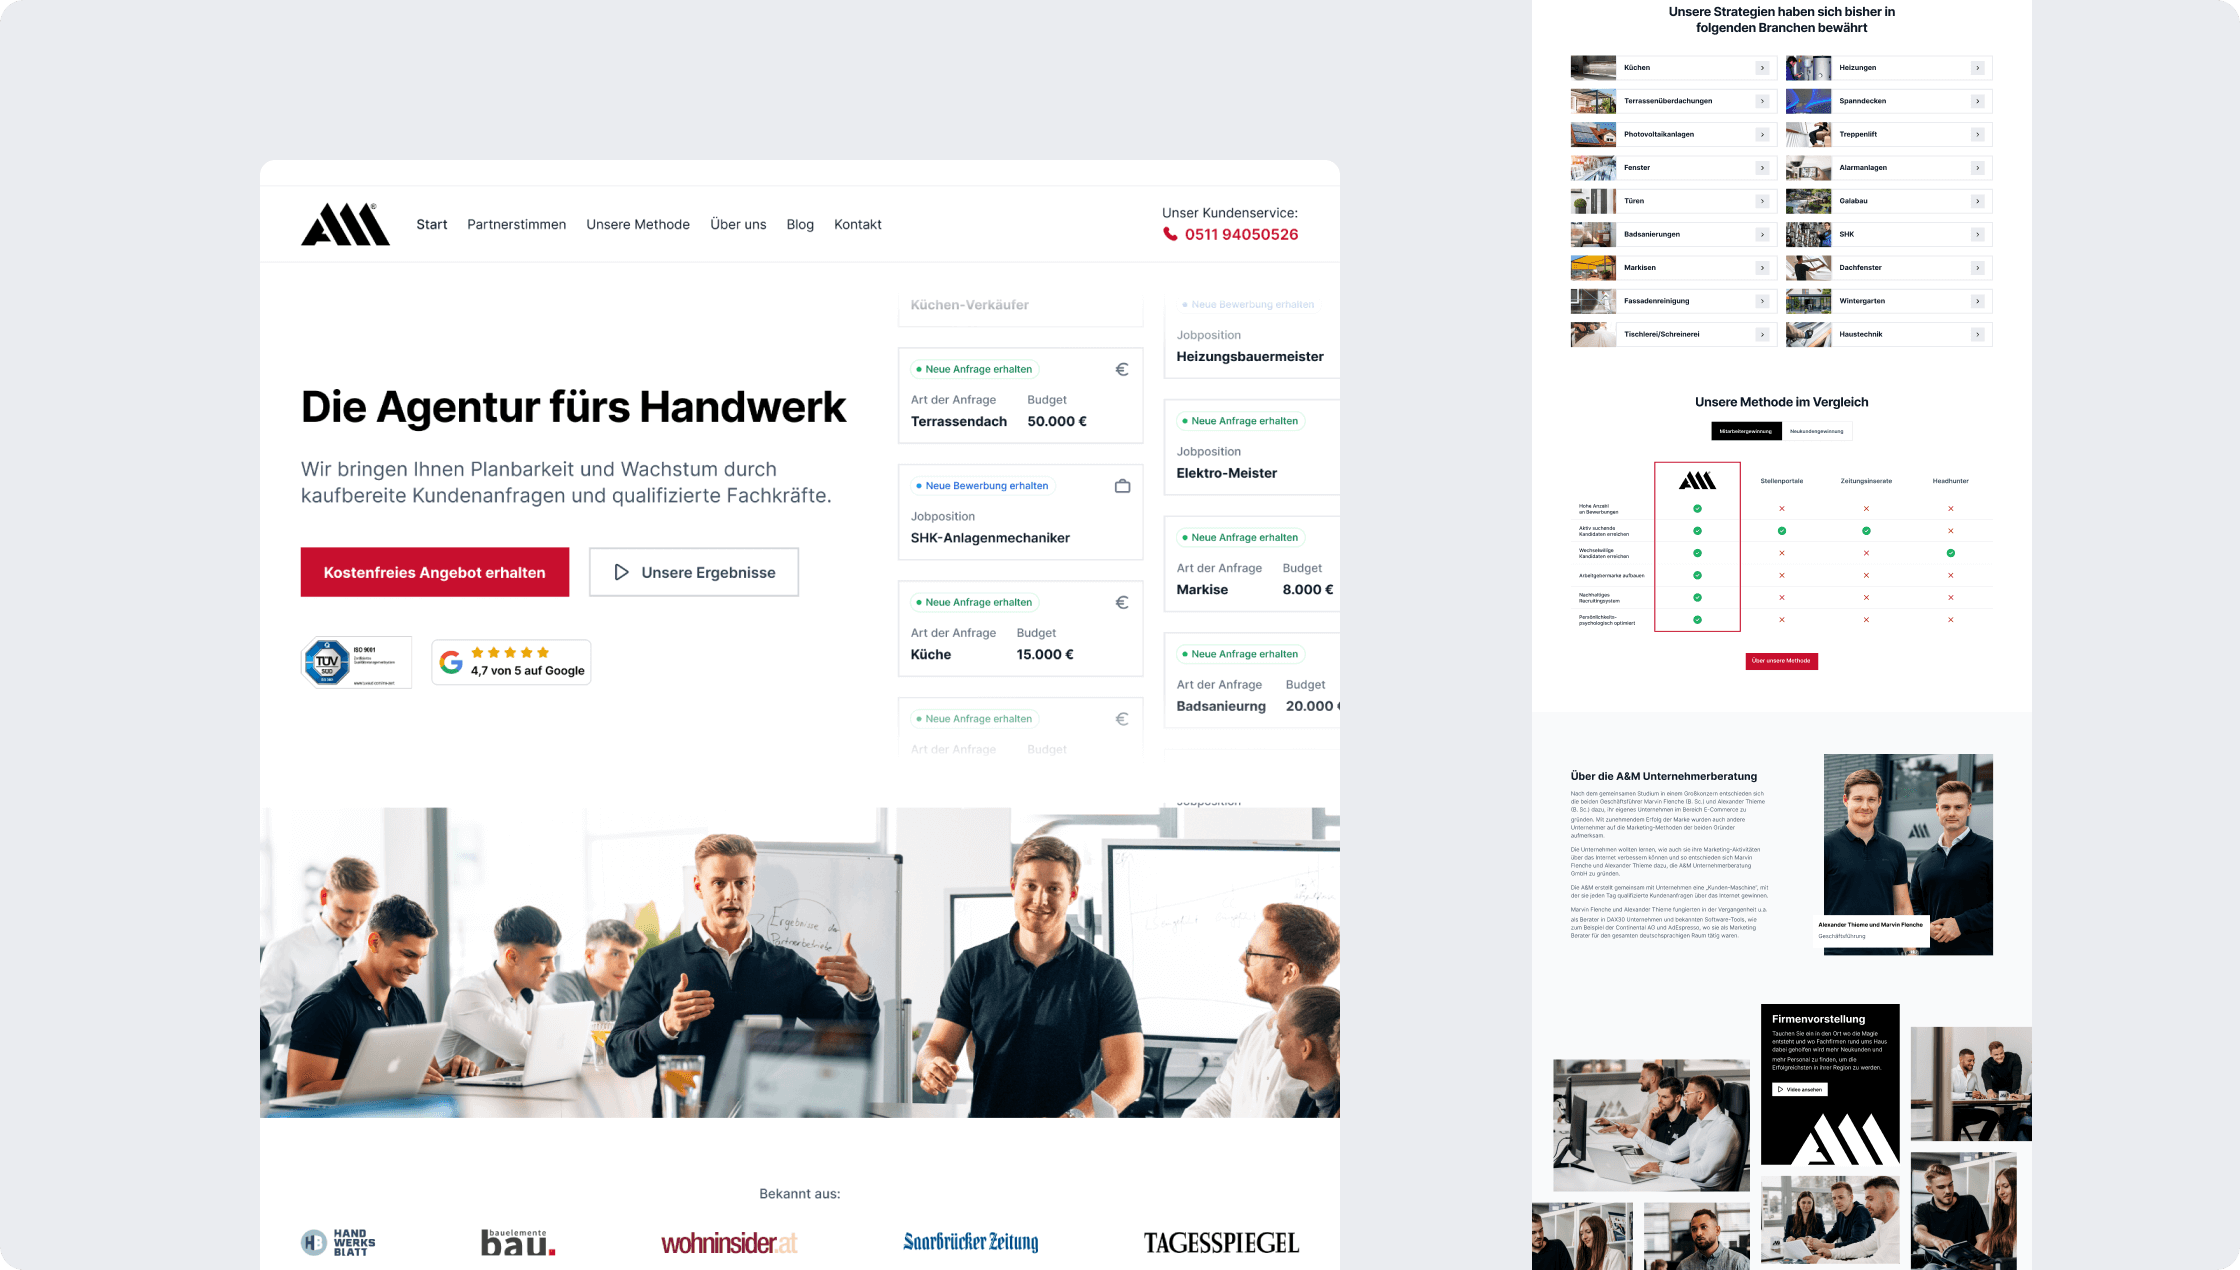 The new homepage of A&M Unternehmerberatung in detail